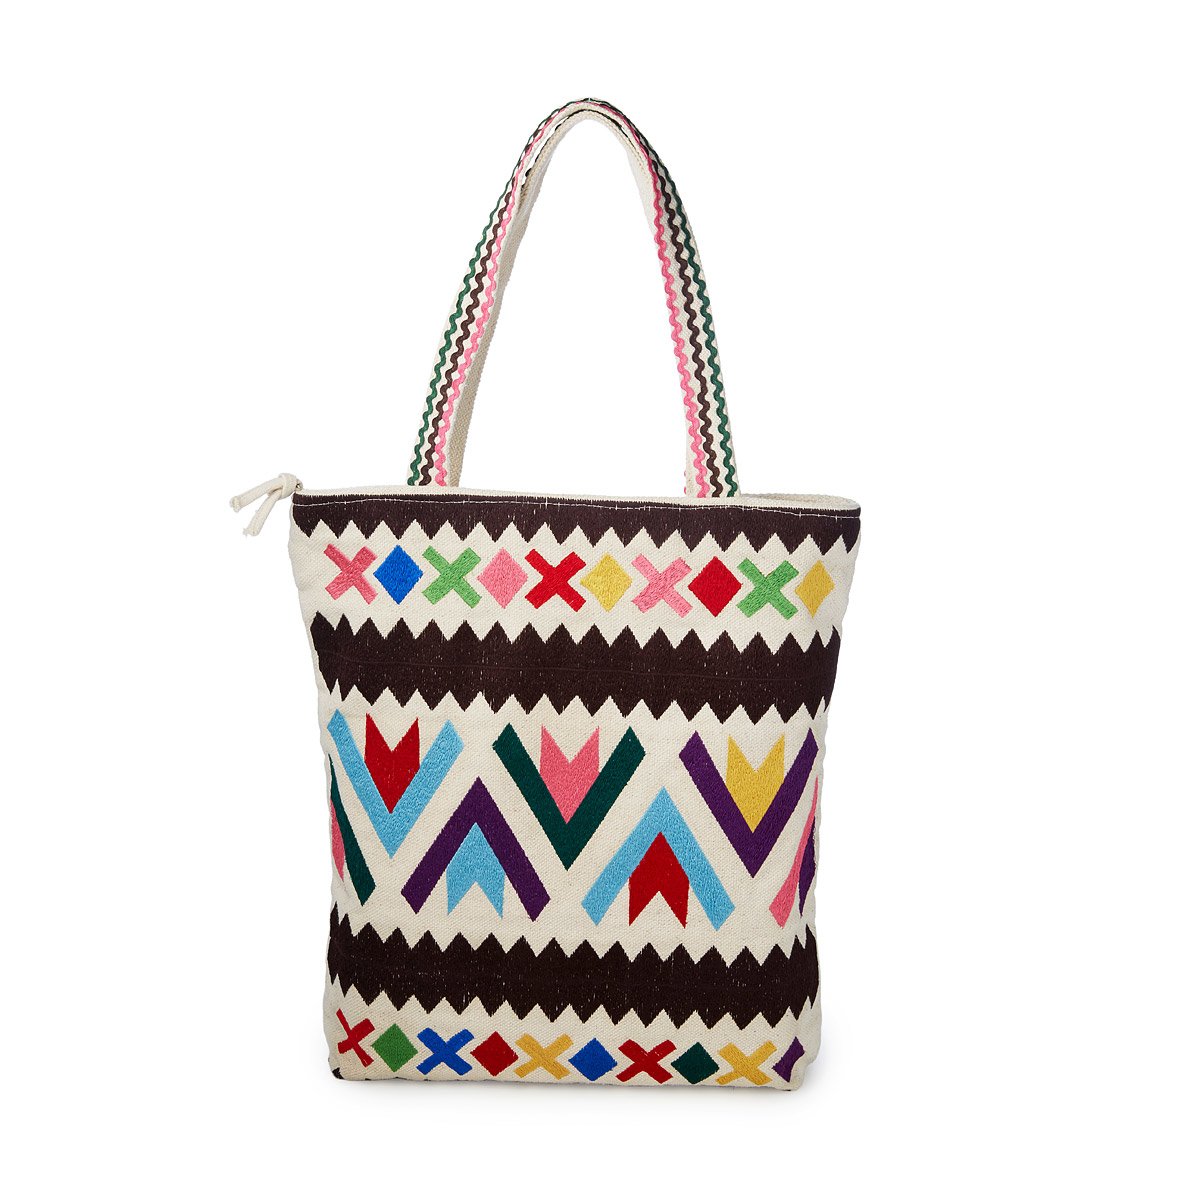 Handwoven Tulip Tote | floral handbags, tulip flower images | UncommonGoods